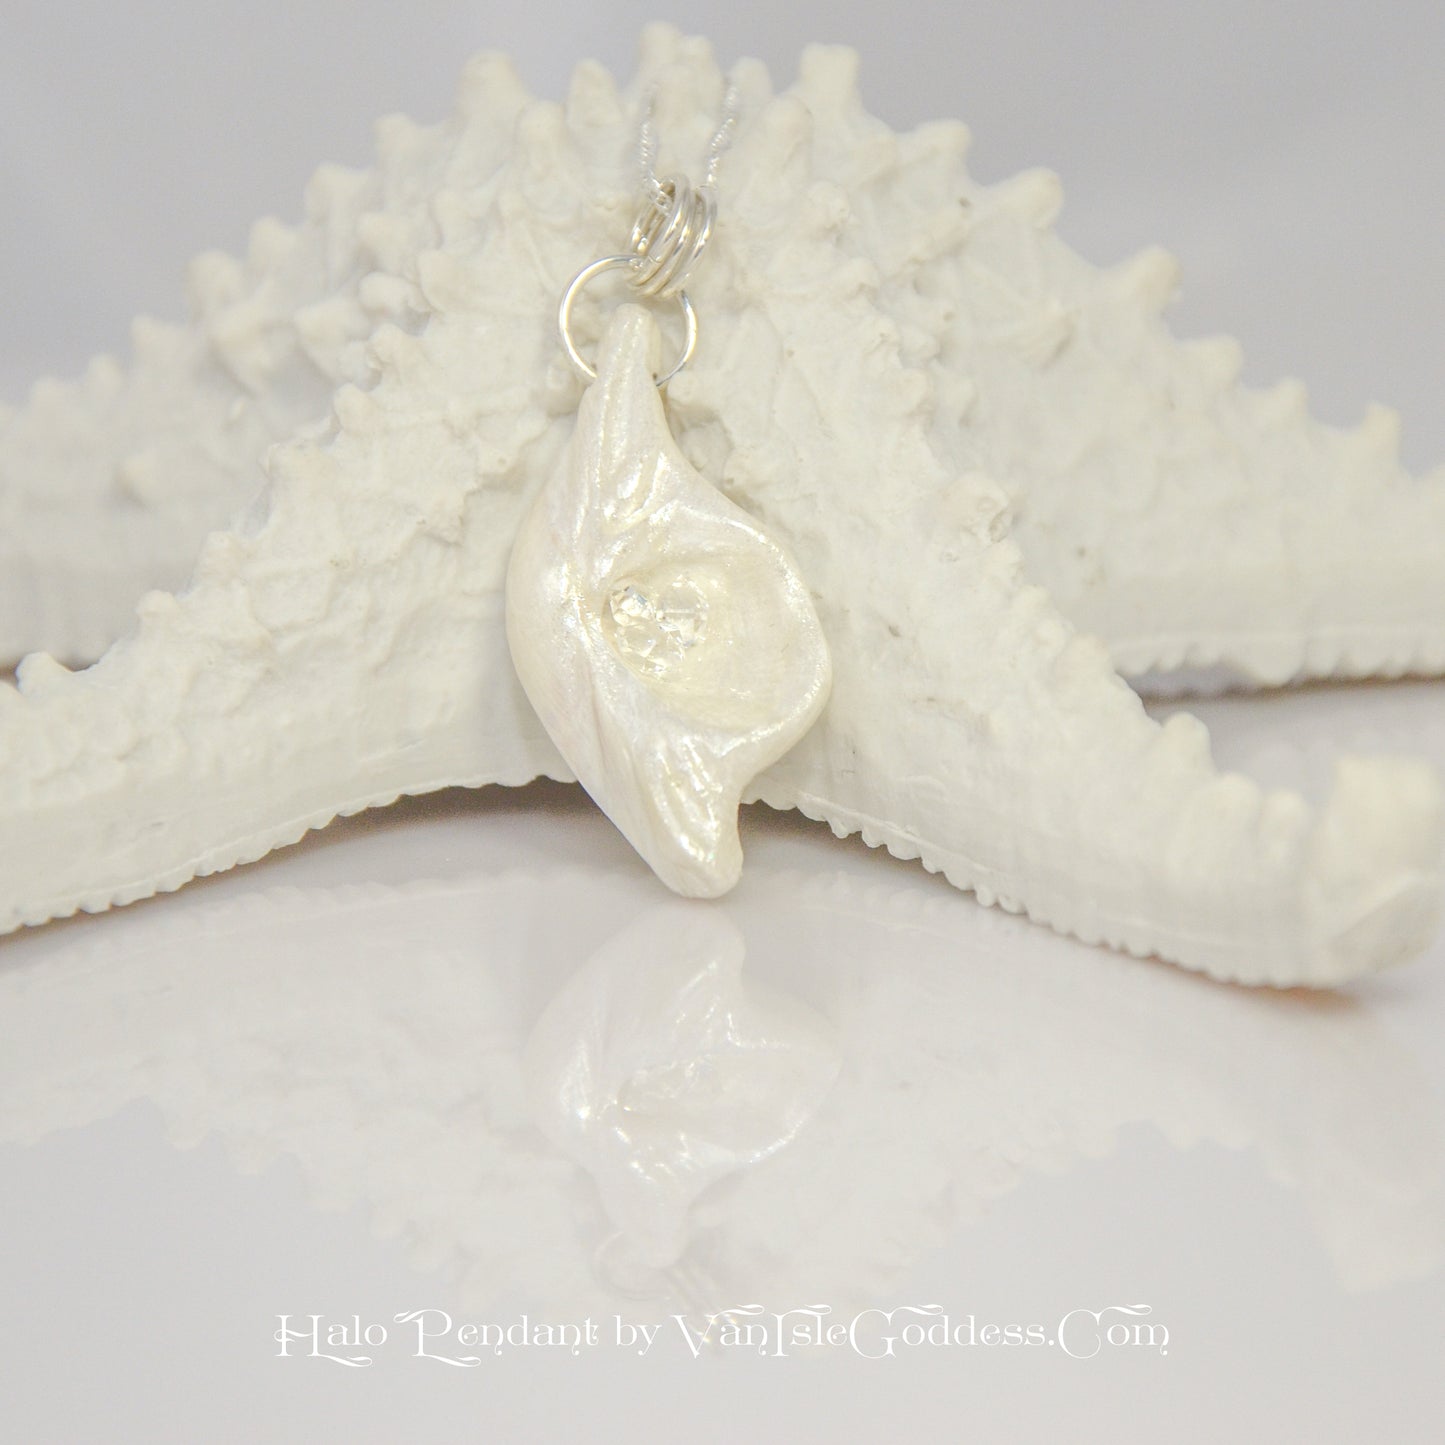 Halo natural seashell pendant with three herkimer diamonds. The pendant is shown resting on a starfish.